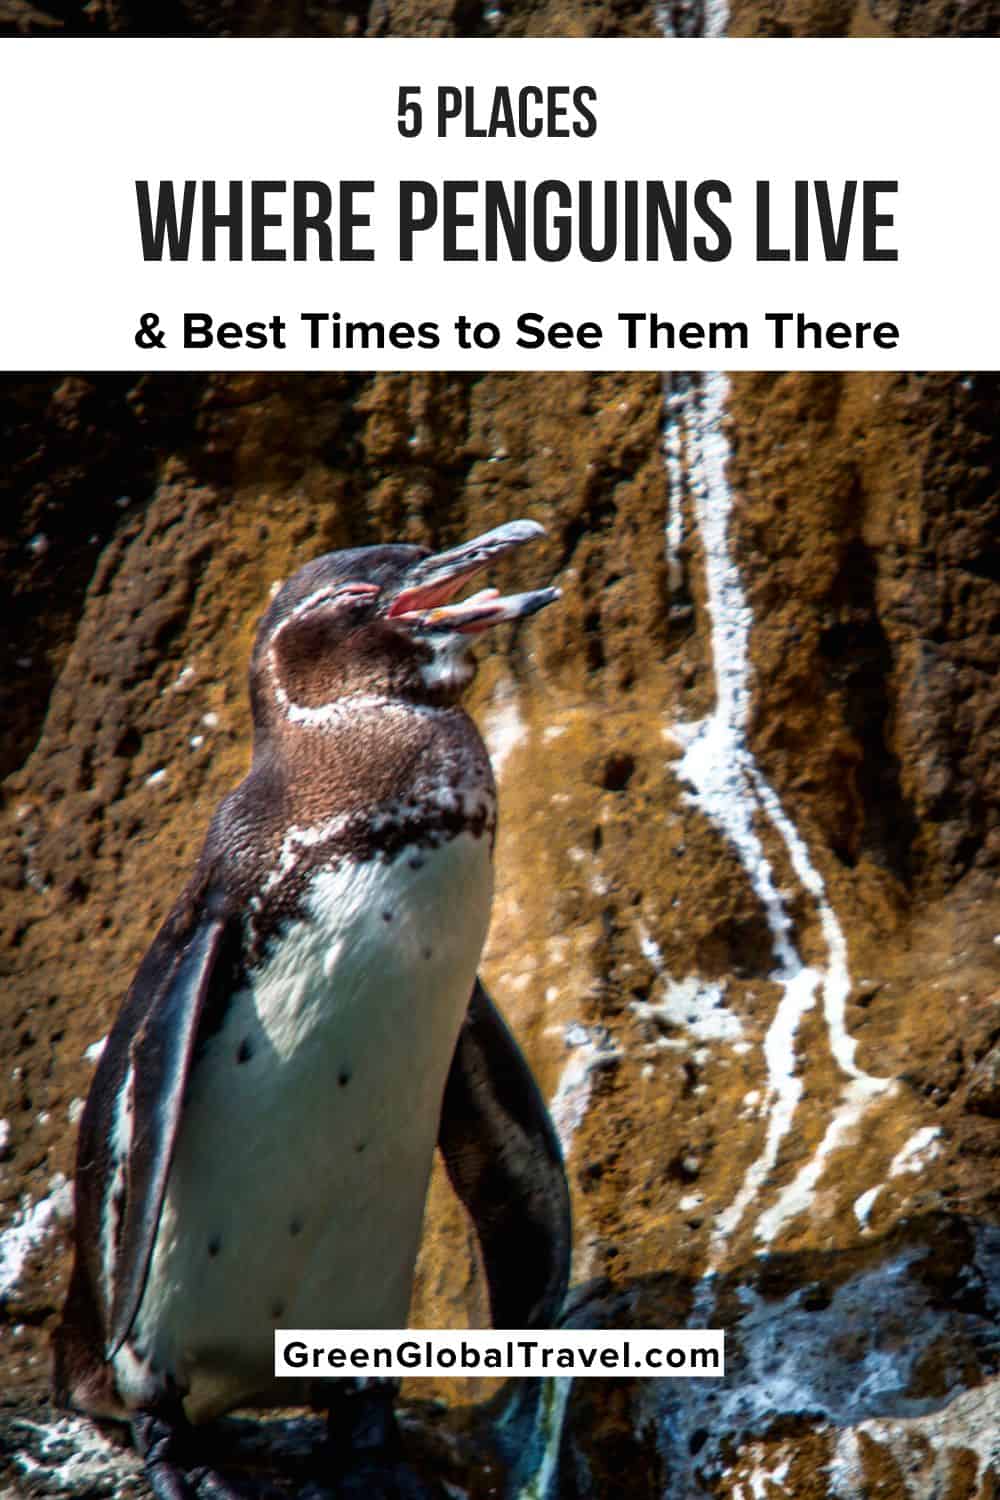 5 Places Where Penguins Live and Best Times to See Them There including info on types of penguins and specific islands where you can find them. | where do penguins live | where are penguins found | are penguins endangered | penguins live where | where live penguins | where do emperor penguins live | penguins live in | do penguins live in antarctica | are there penguins in antarctica | where are penguins |where does penguins live | are there penguins in africa | are there penguins in australia